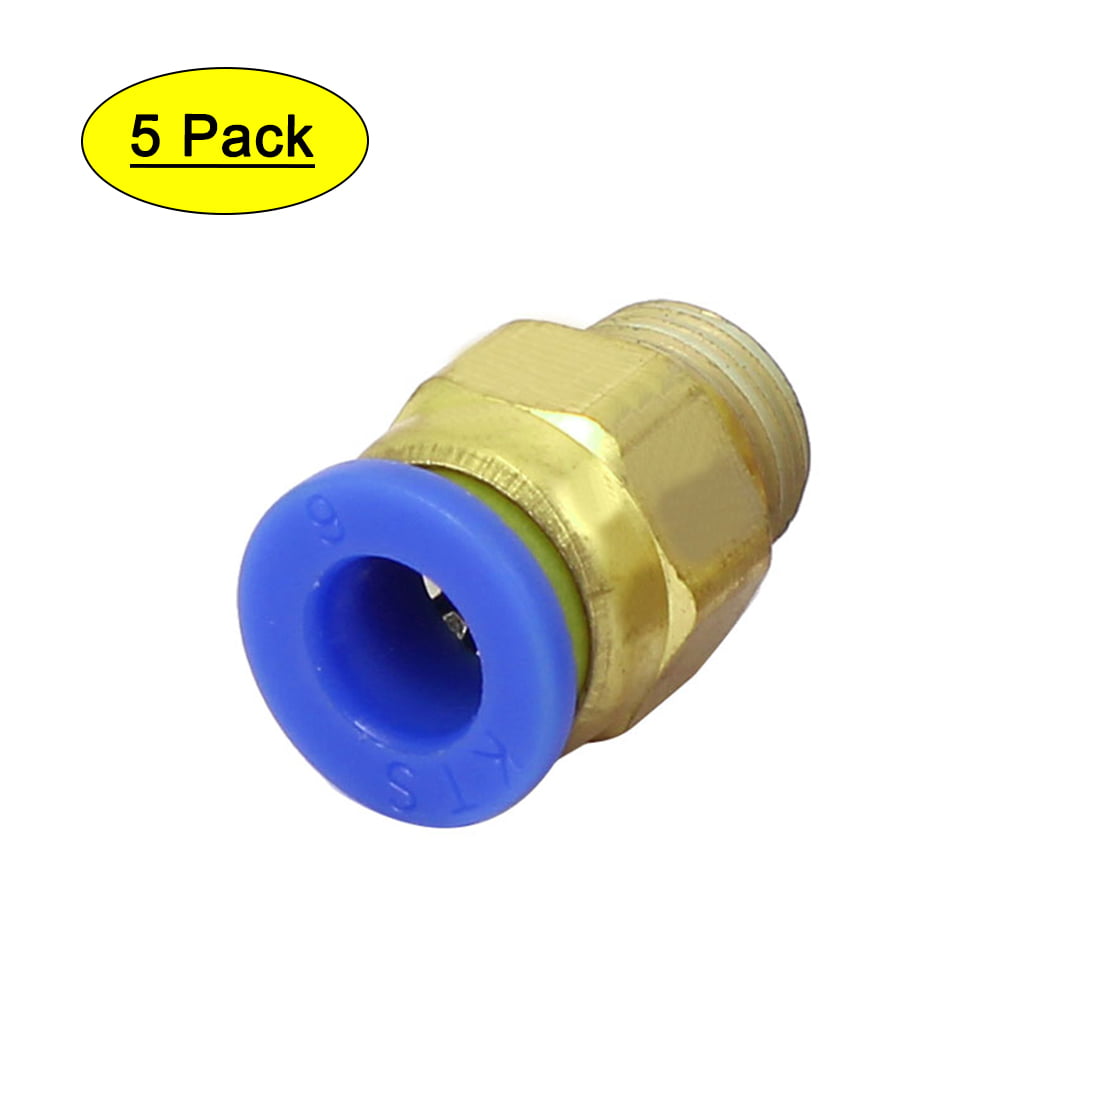 Pack of 5 Generic Push in Quick Touch to Connect Fitting 1/2 OD Tube x 3/8 Male NPT Thread Pneumatic Straight Joints/Coupler 